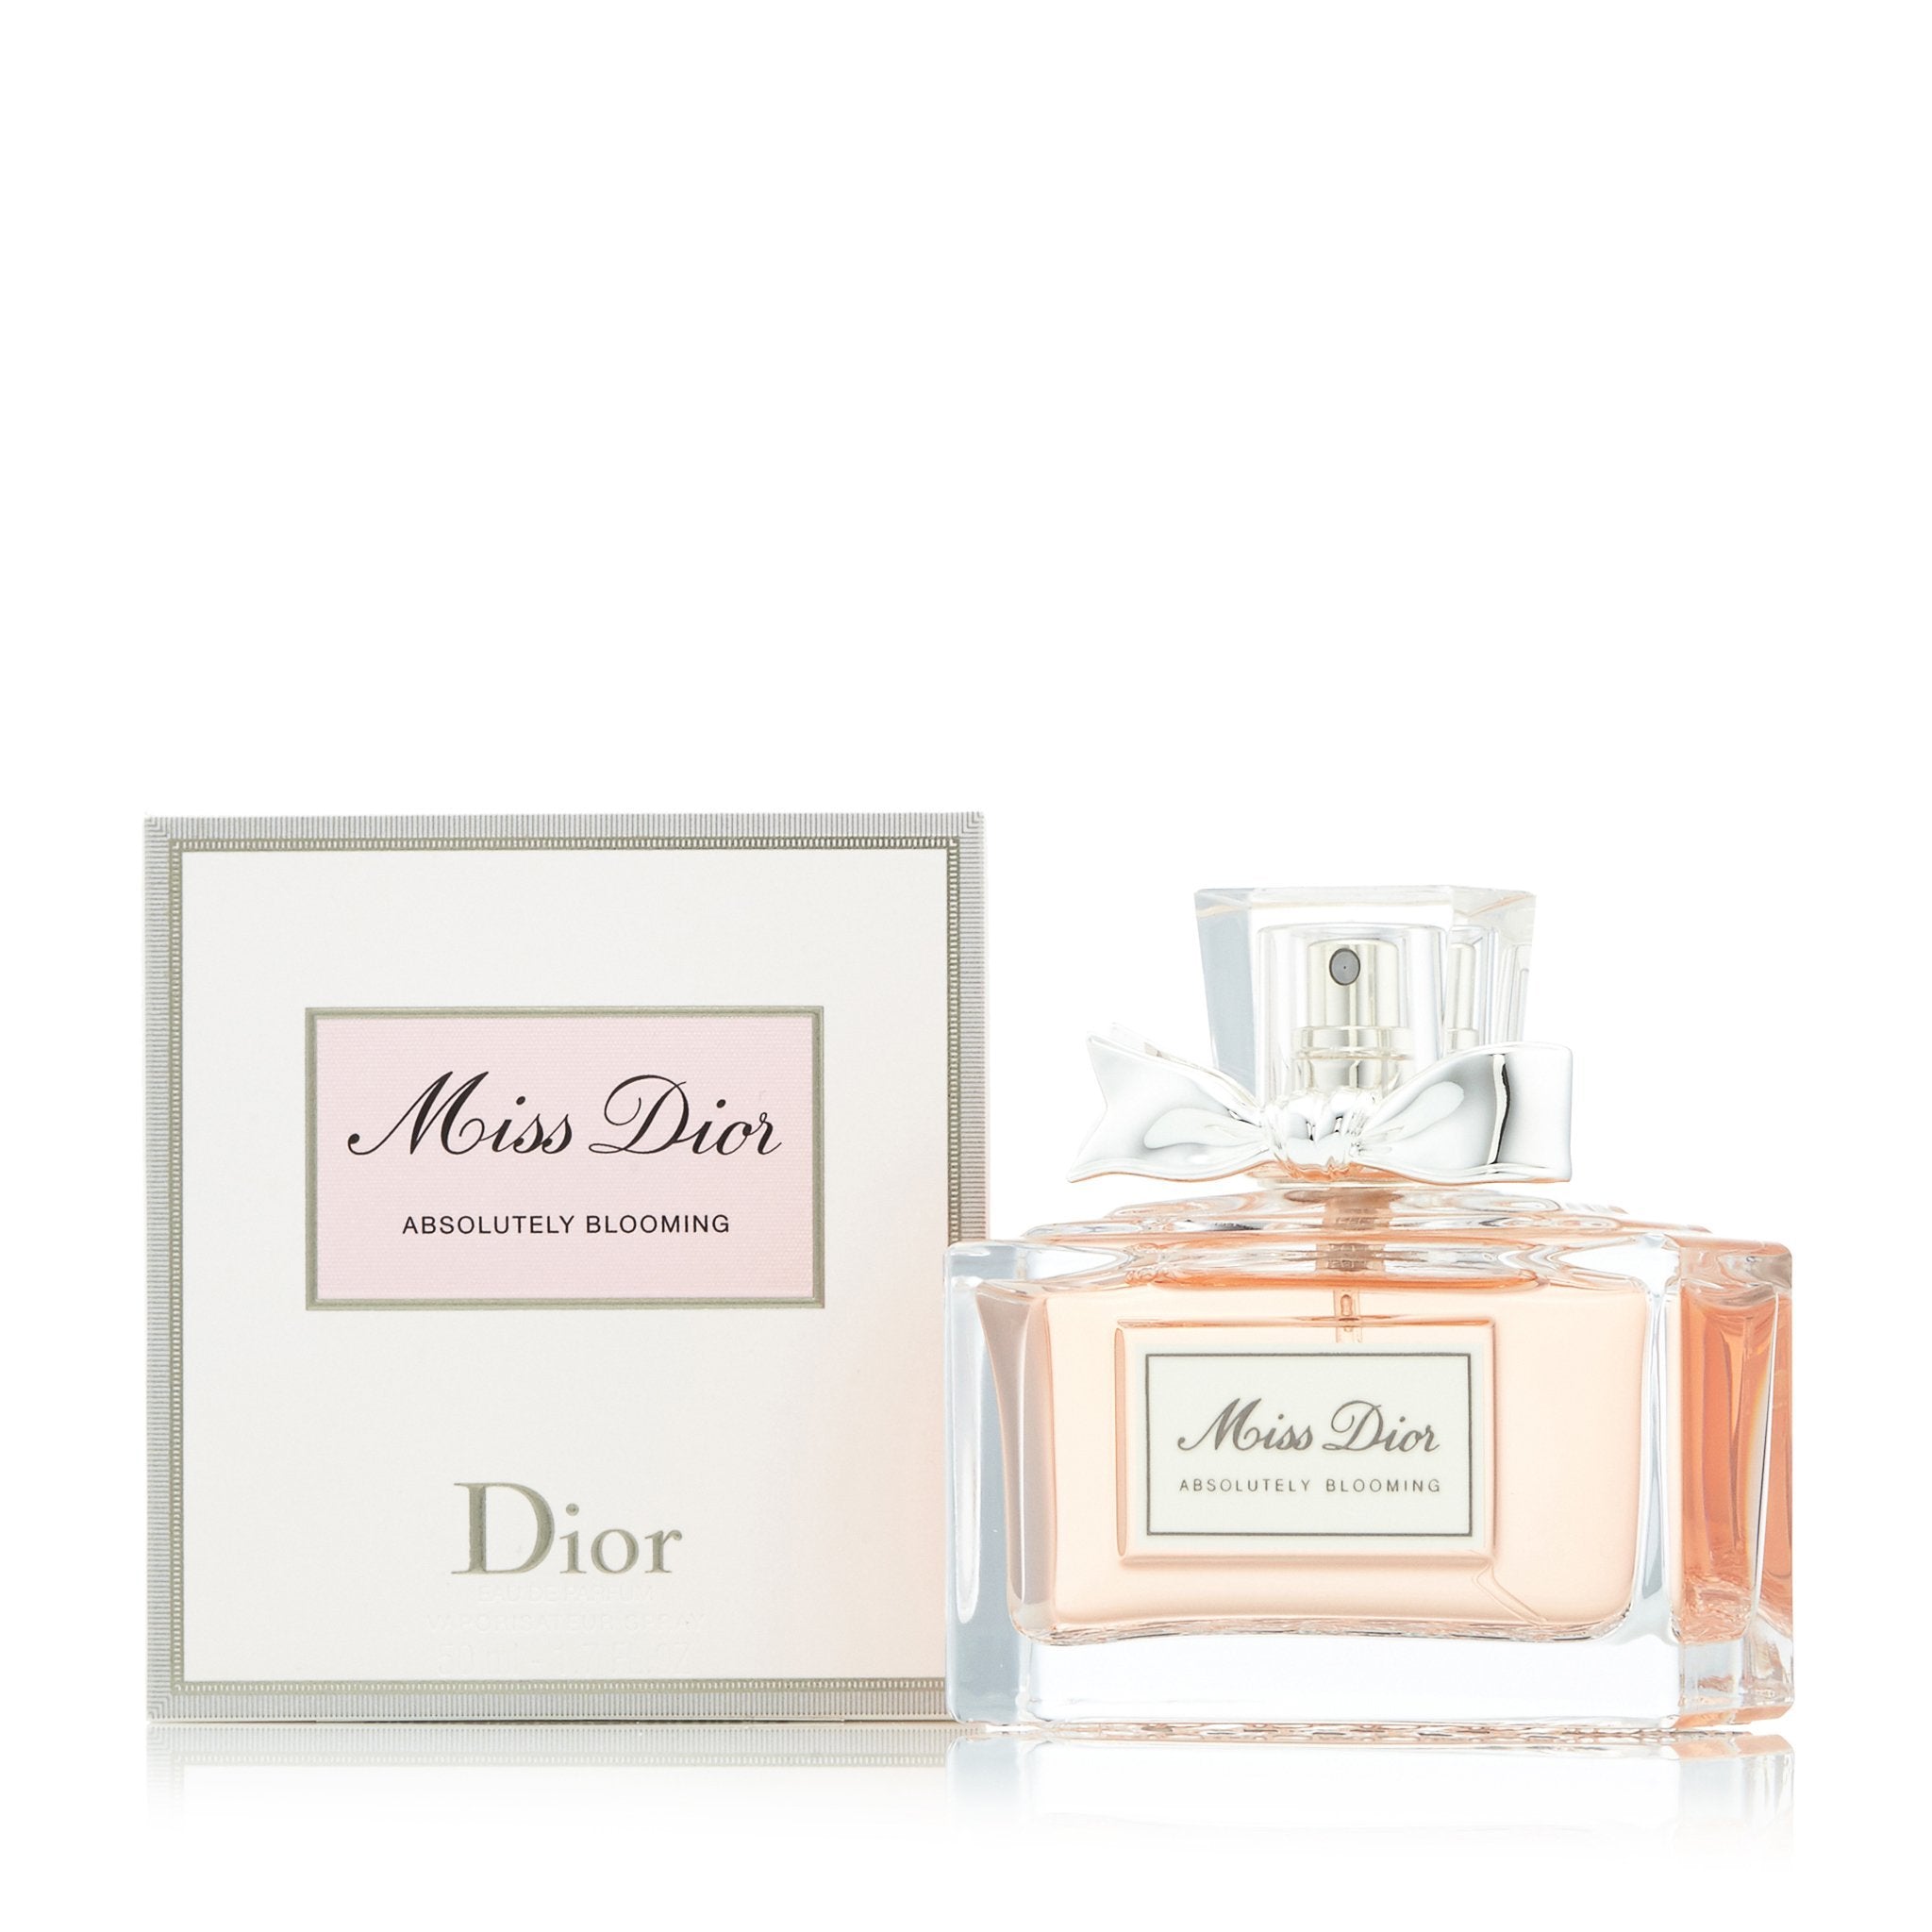 perfume miss dior absolutely blooming